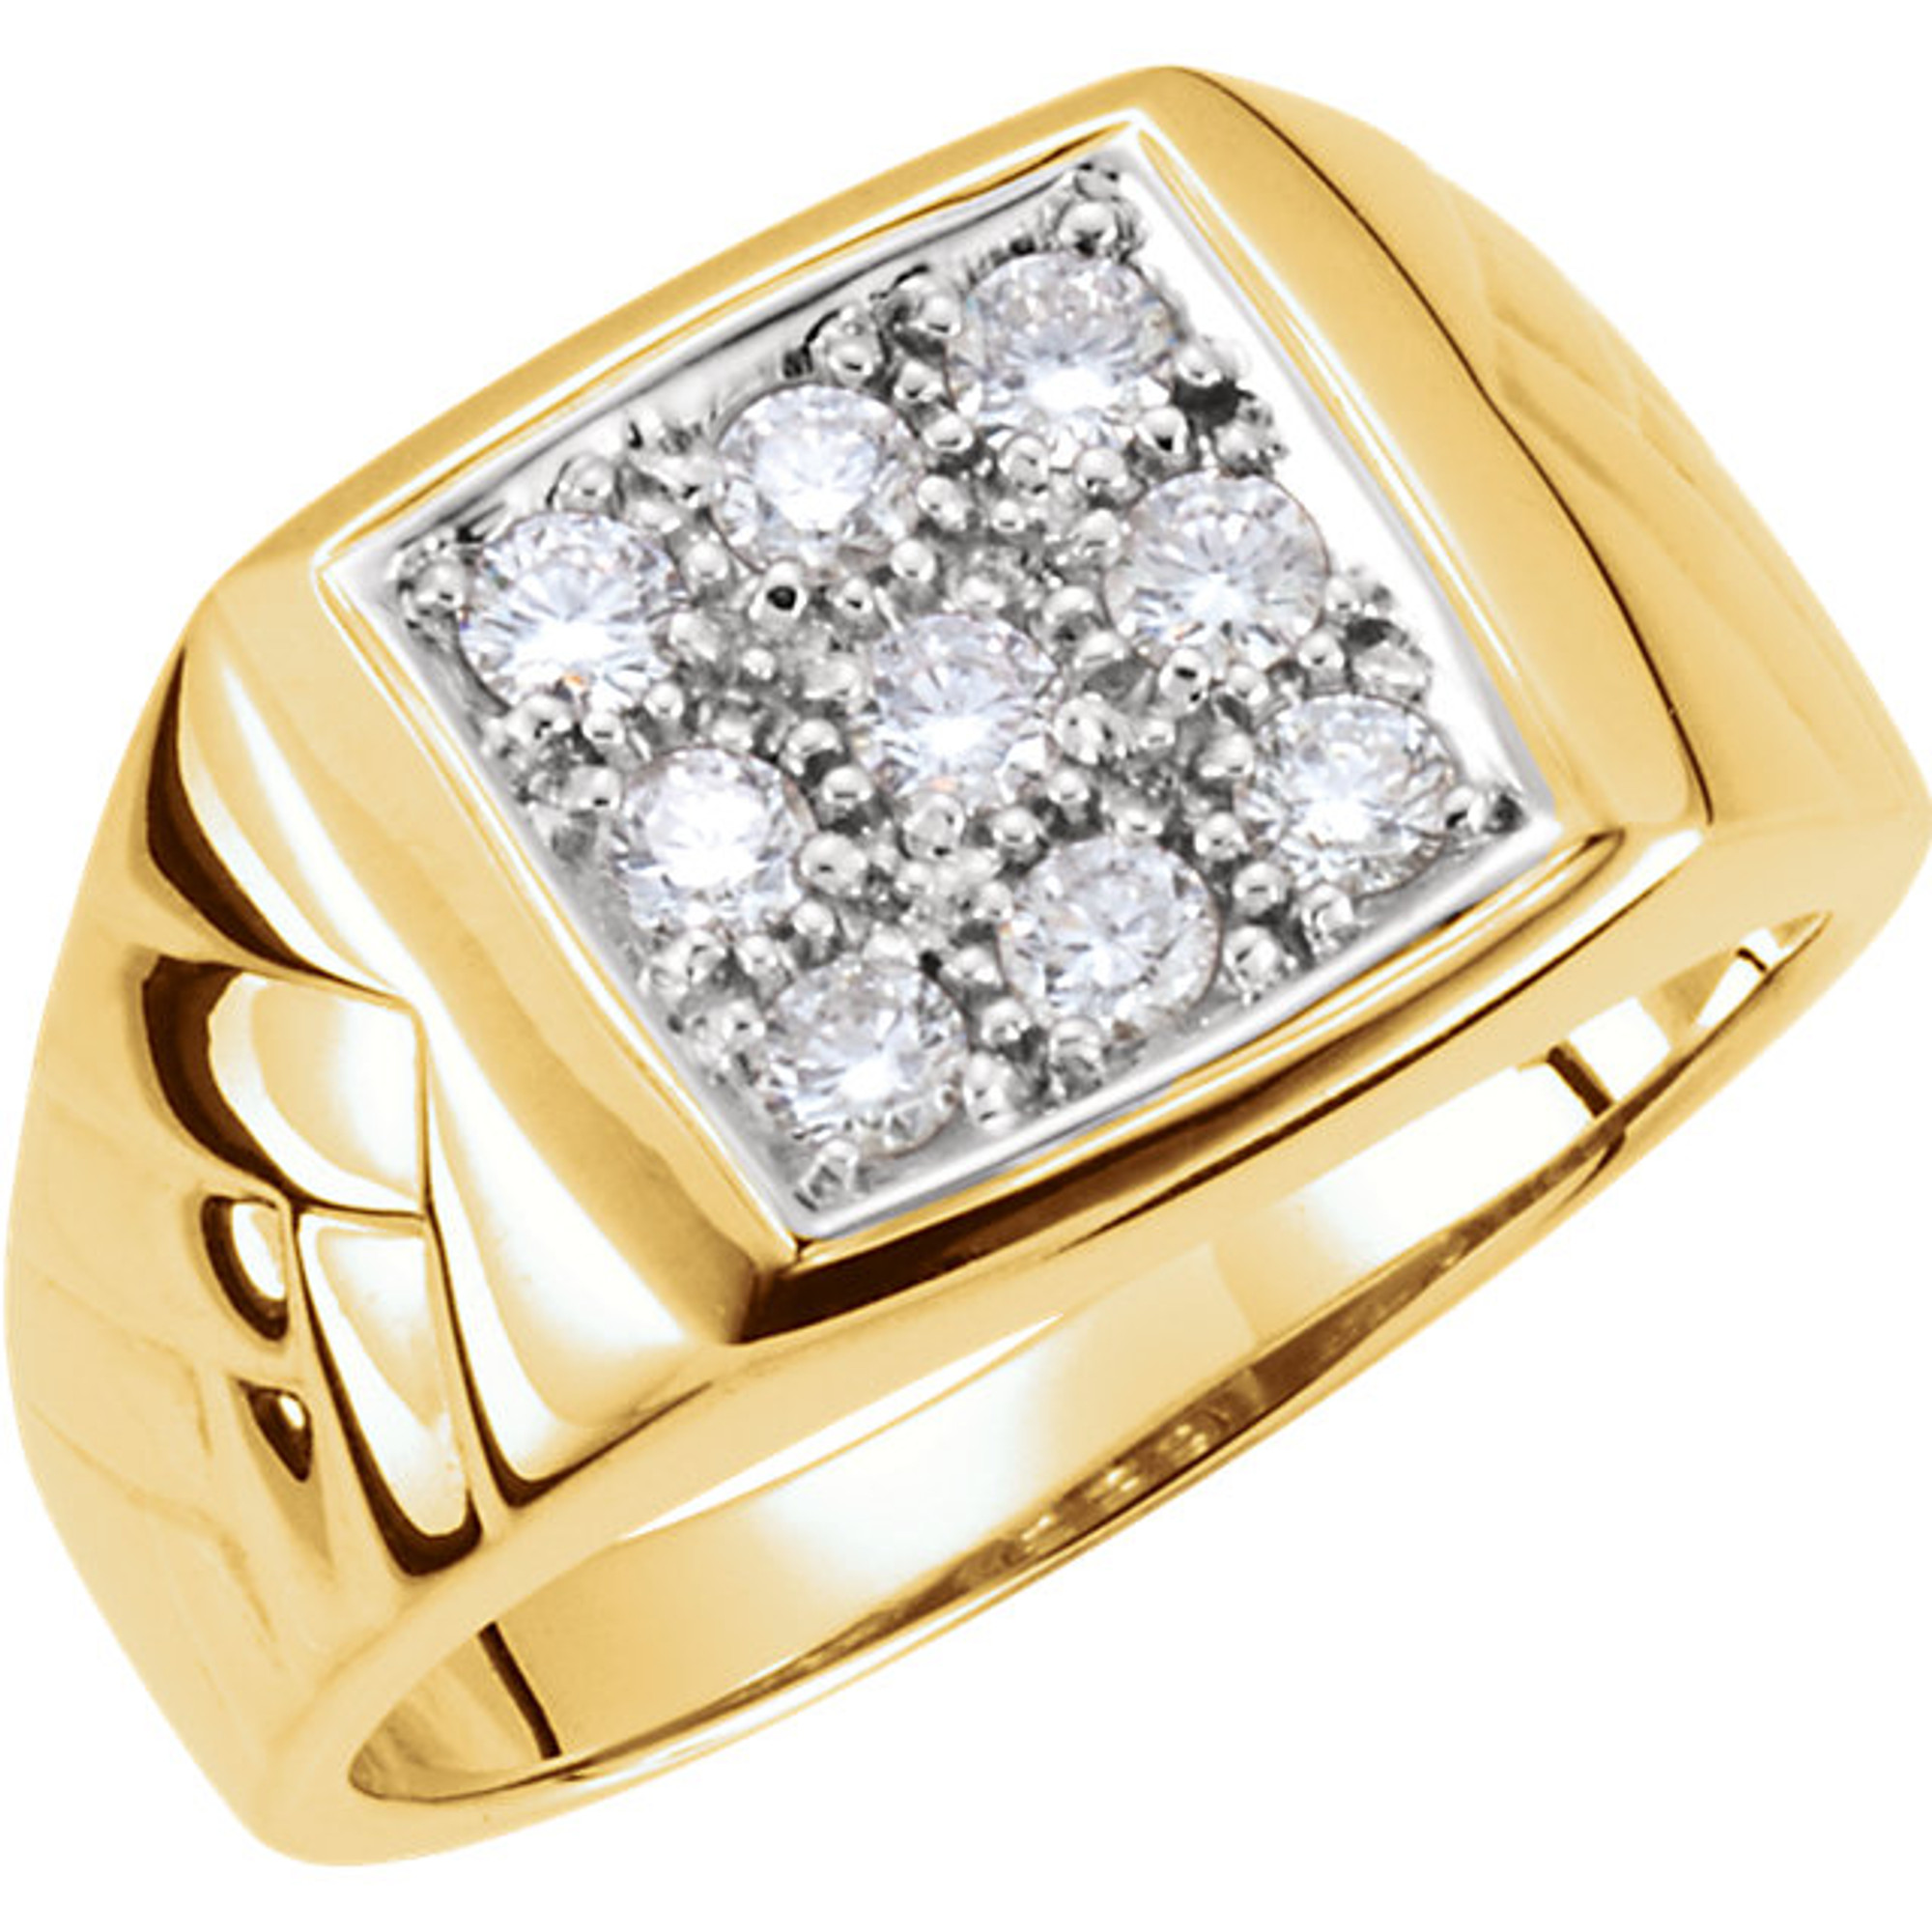 Sold at Auction: JEWELRY. Men's 18kt Gold Diamond Ring.